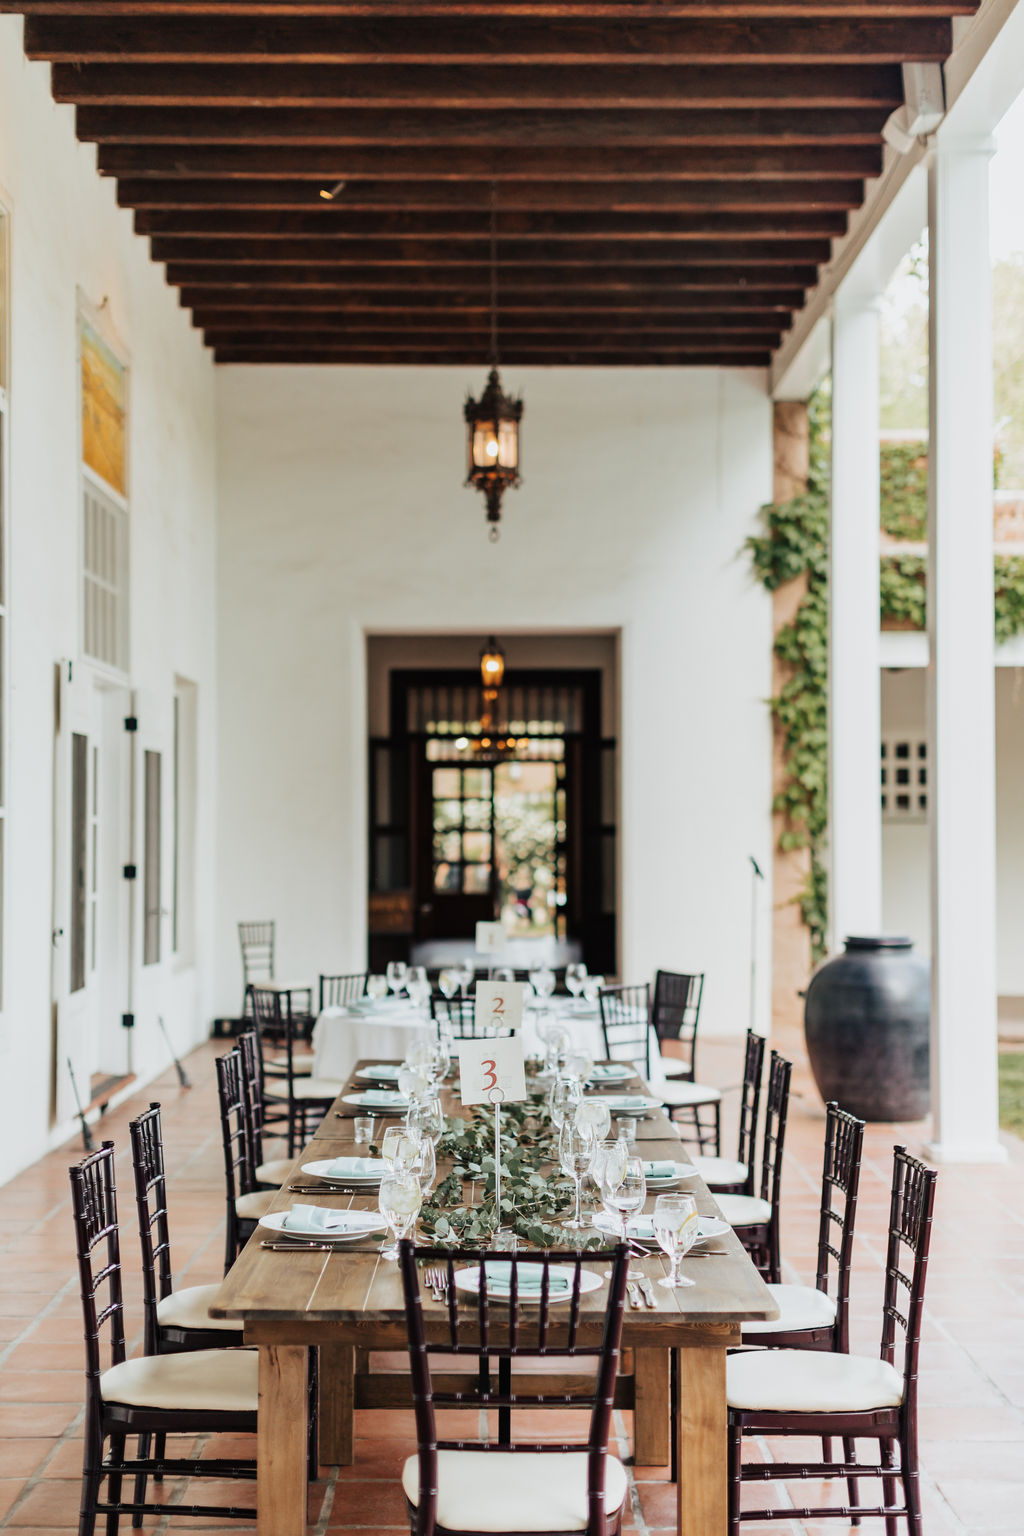 Long wood table with dinner settings and greenery on patio with red tile floors and wood ceiling